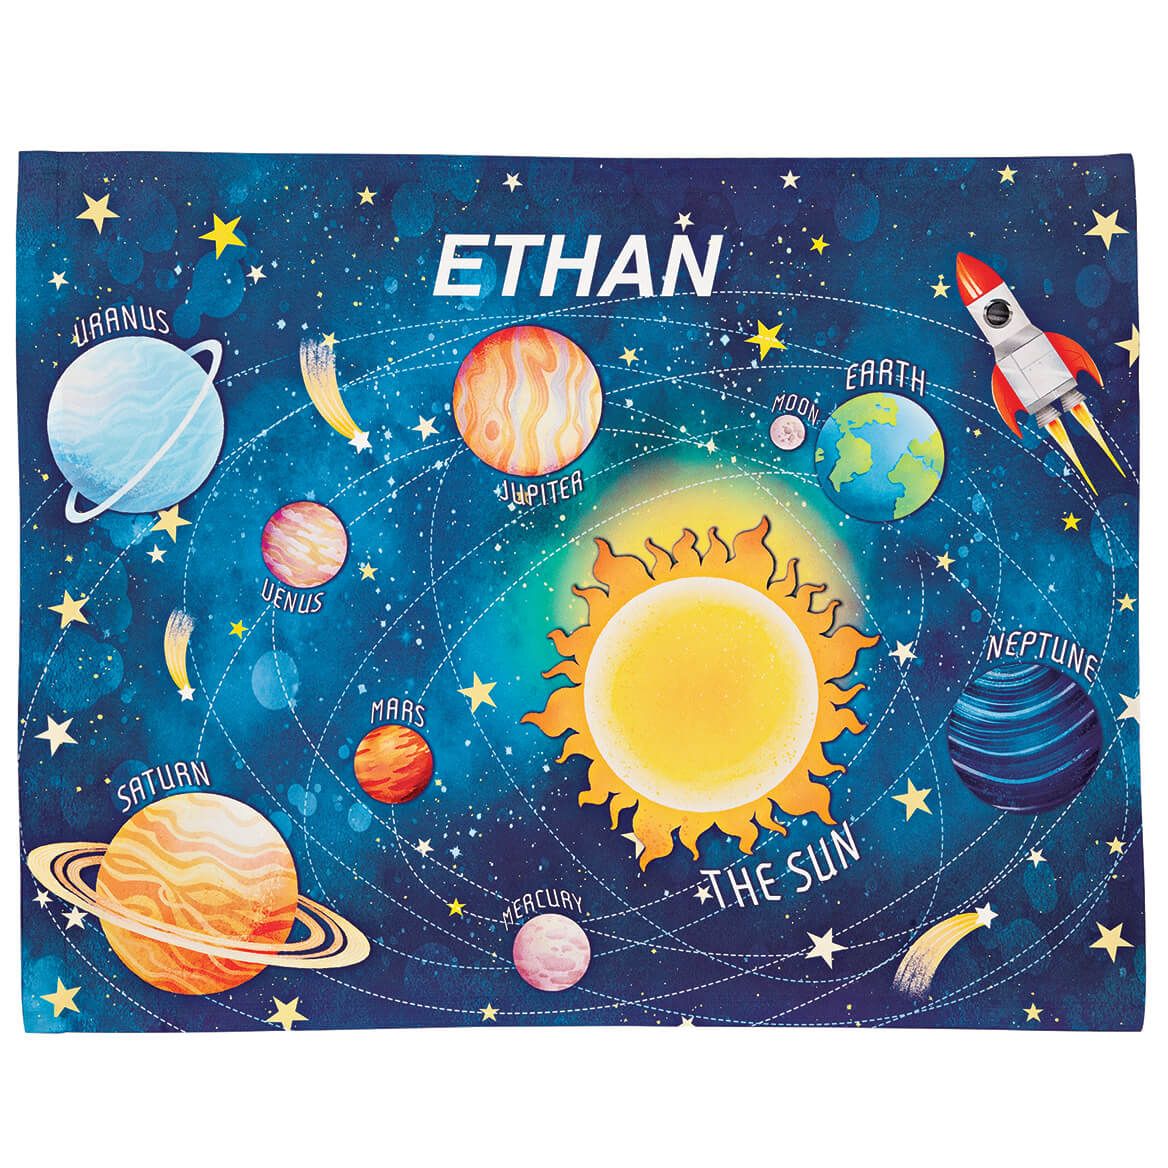 Personalized Space Pillowcase + '-' + 375915